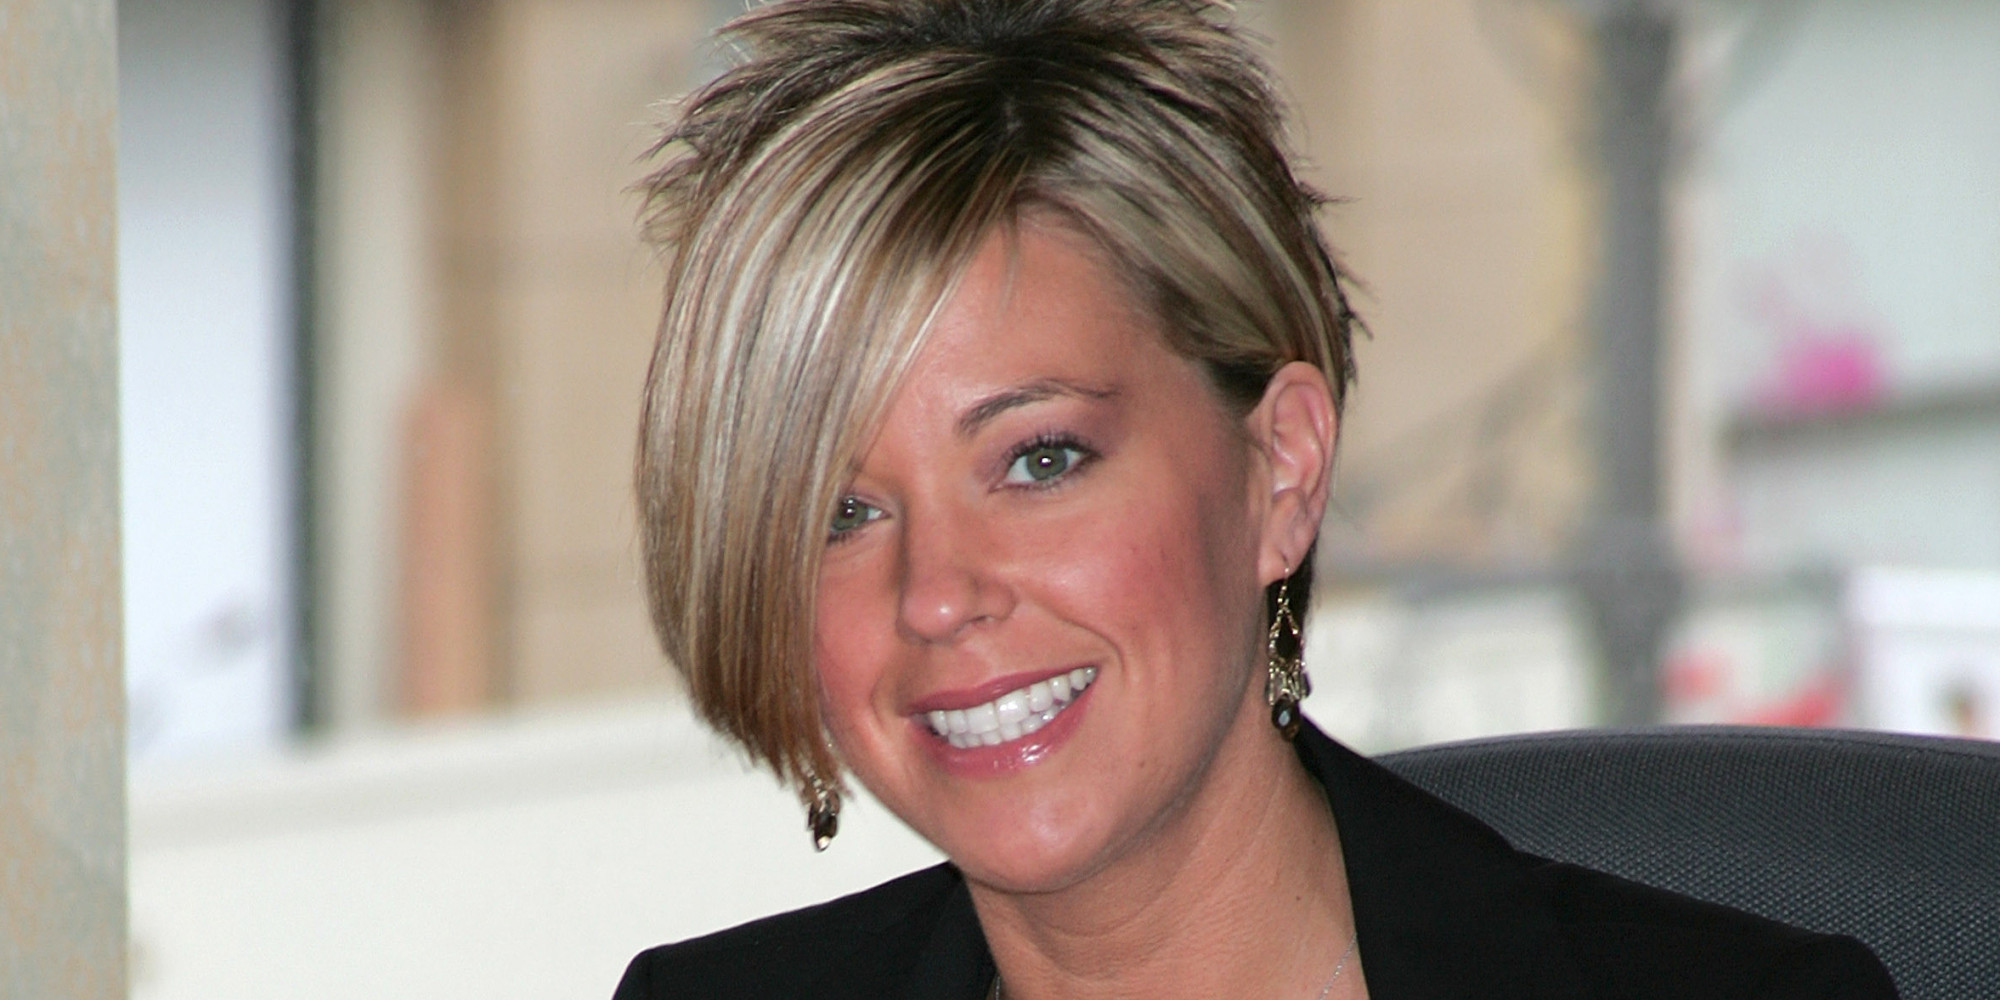 Kate Gosselin Looks Pretty Different With Long Hair While Filming